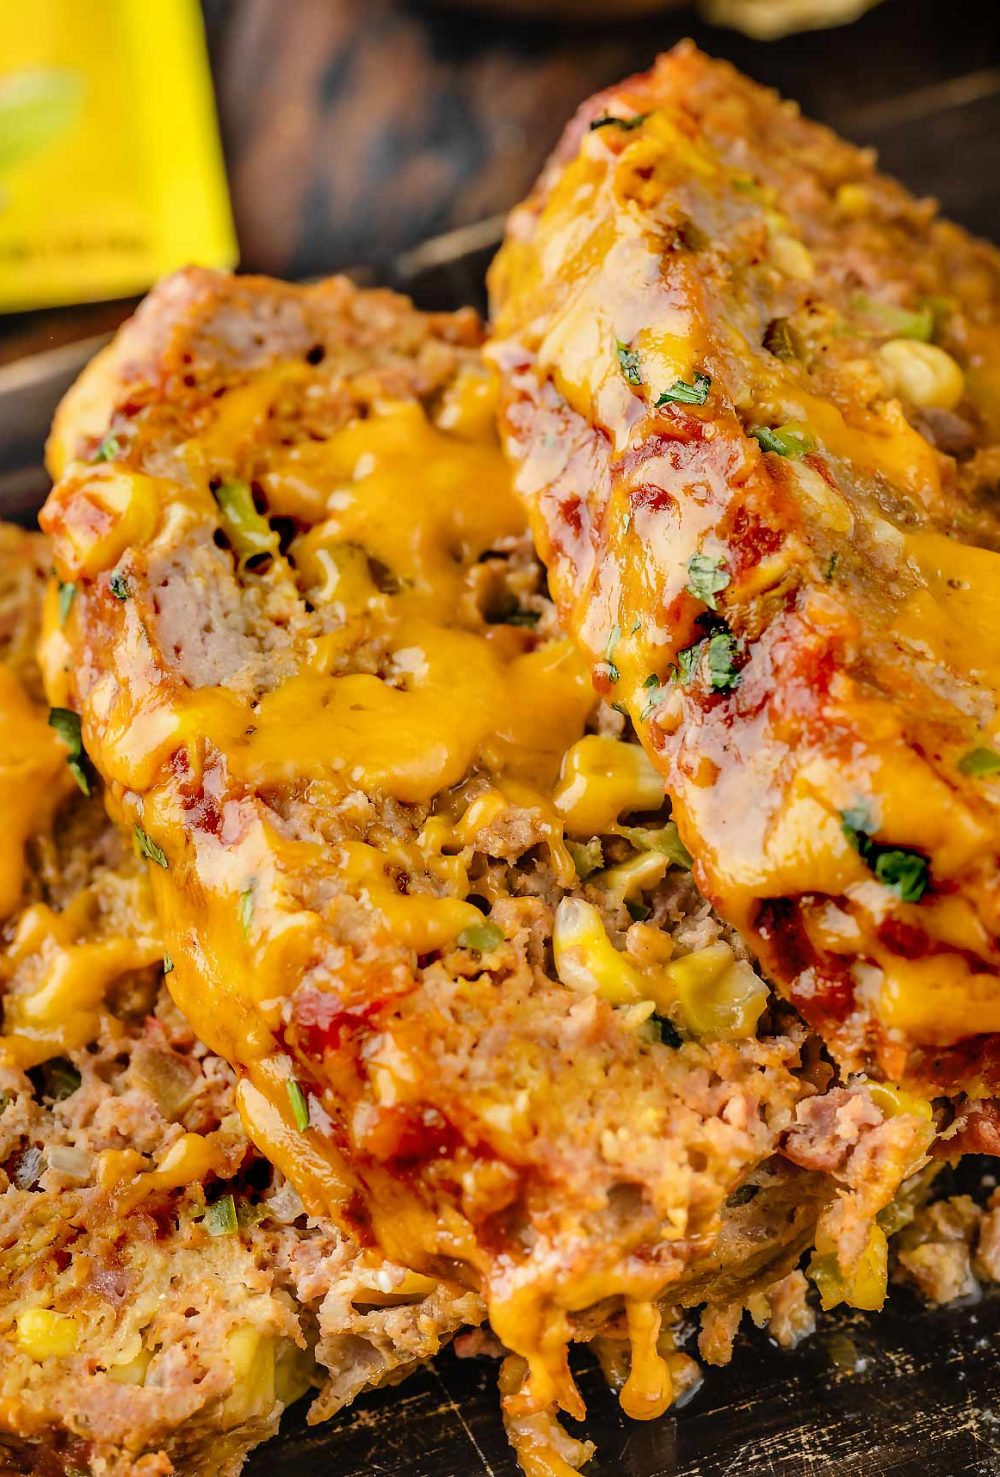 Close-up of Taco meatloaf slices with melted cheese, showcasing its delicious and cheesy texture.